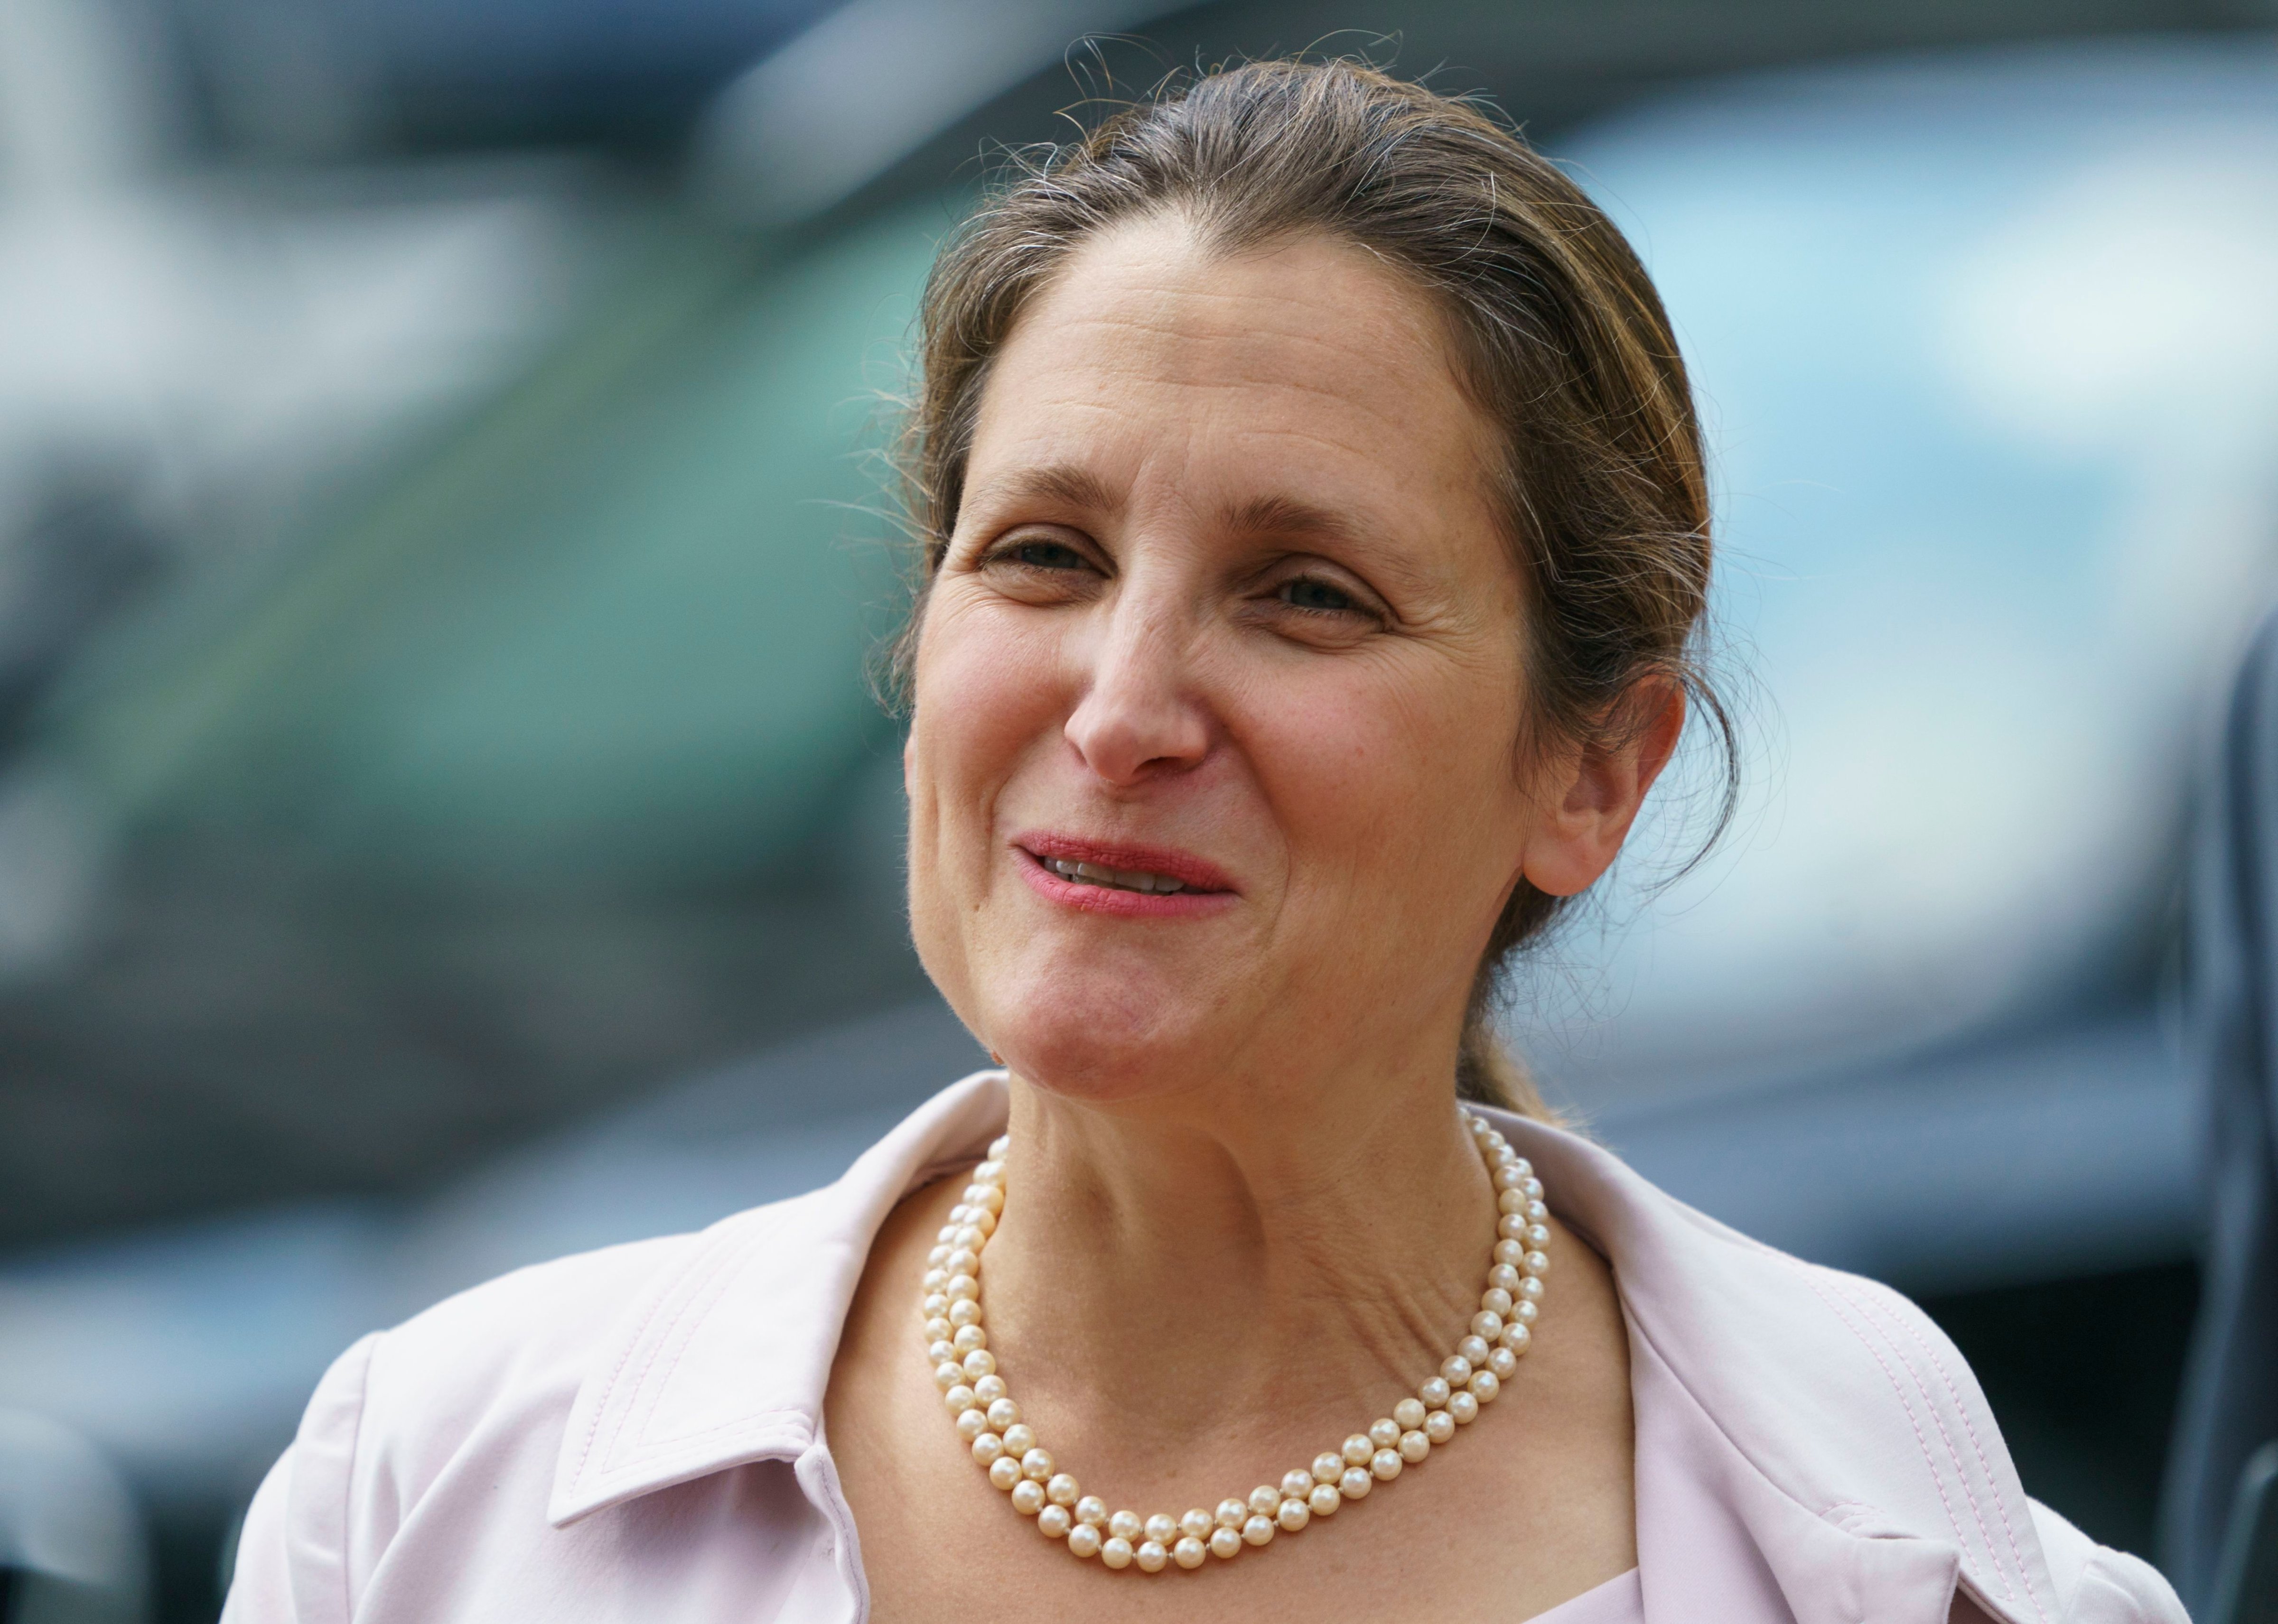 Canadian Foreign Affairs Minister Chrystia Freeland arrives at the Office Of The United States Trade Representative in Washington, D.C. on Sept. 20, 2018. (Carolyn Kaster/AP/REX/Shutterstock)